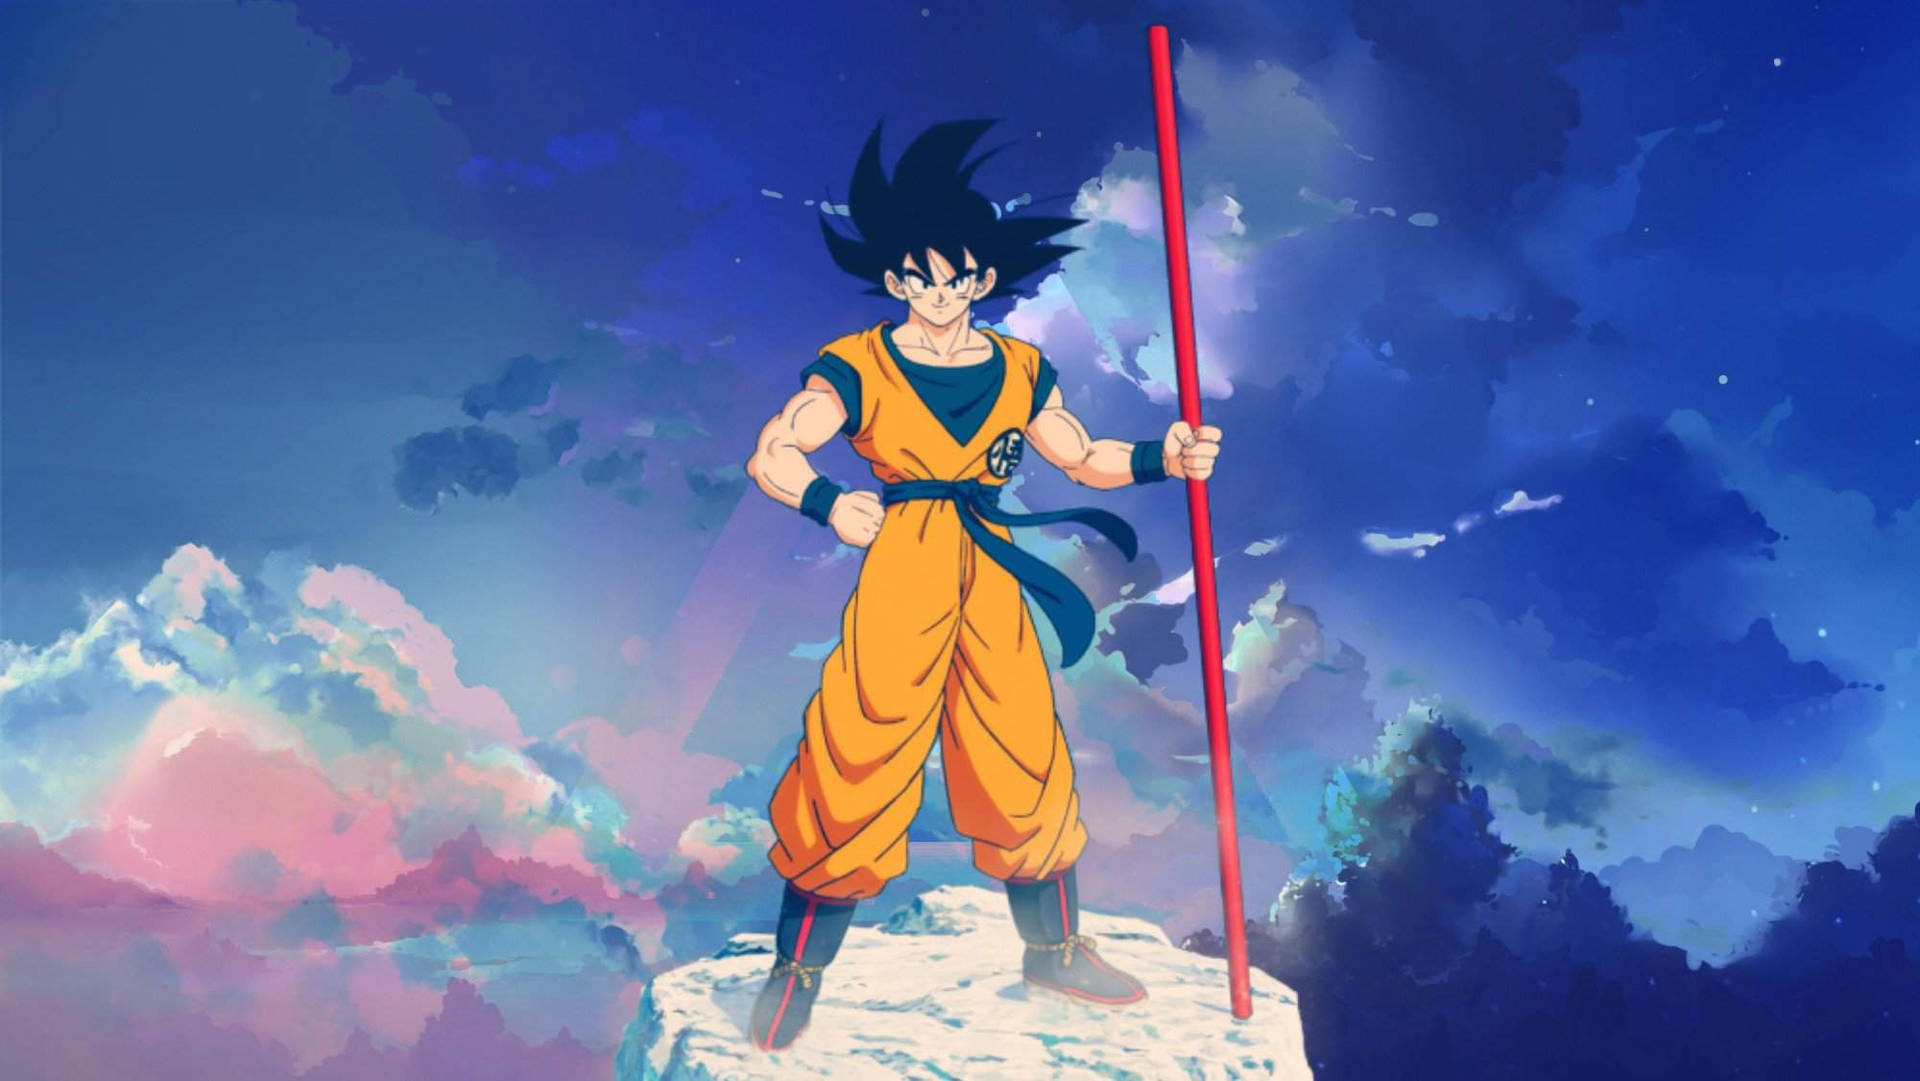 Gokuis A Character From The Anime Series Dragon Ball. He Is A Powerful Saiyan Warrior Who Protects The Earth From Various Villains. Goku Is Known For His Incredible Strength, Numerous Transformations, And Never-ending Desire To Become Stronger. With His Iconic Spiky Black Hair, Orange Gi, And Confident Smile, Goku Is Often Depicted In Action-packed Poses In Computer And Mobile Wallpapers. These Wallpapers Capture The Essence Of Goku's Epic Battles And Serve As A Source Of Inspiration For Fans Of The Series. Whether It's Goku Charging Up For A Powerful Attack Or Unleashing His Signature Move, The Kamehameha, These Wallpapers Bring The Excitement And Energy Of The Dragon Ball Universe To Your Device. Wallpaper